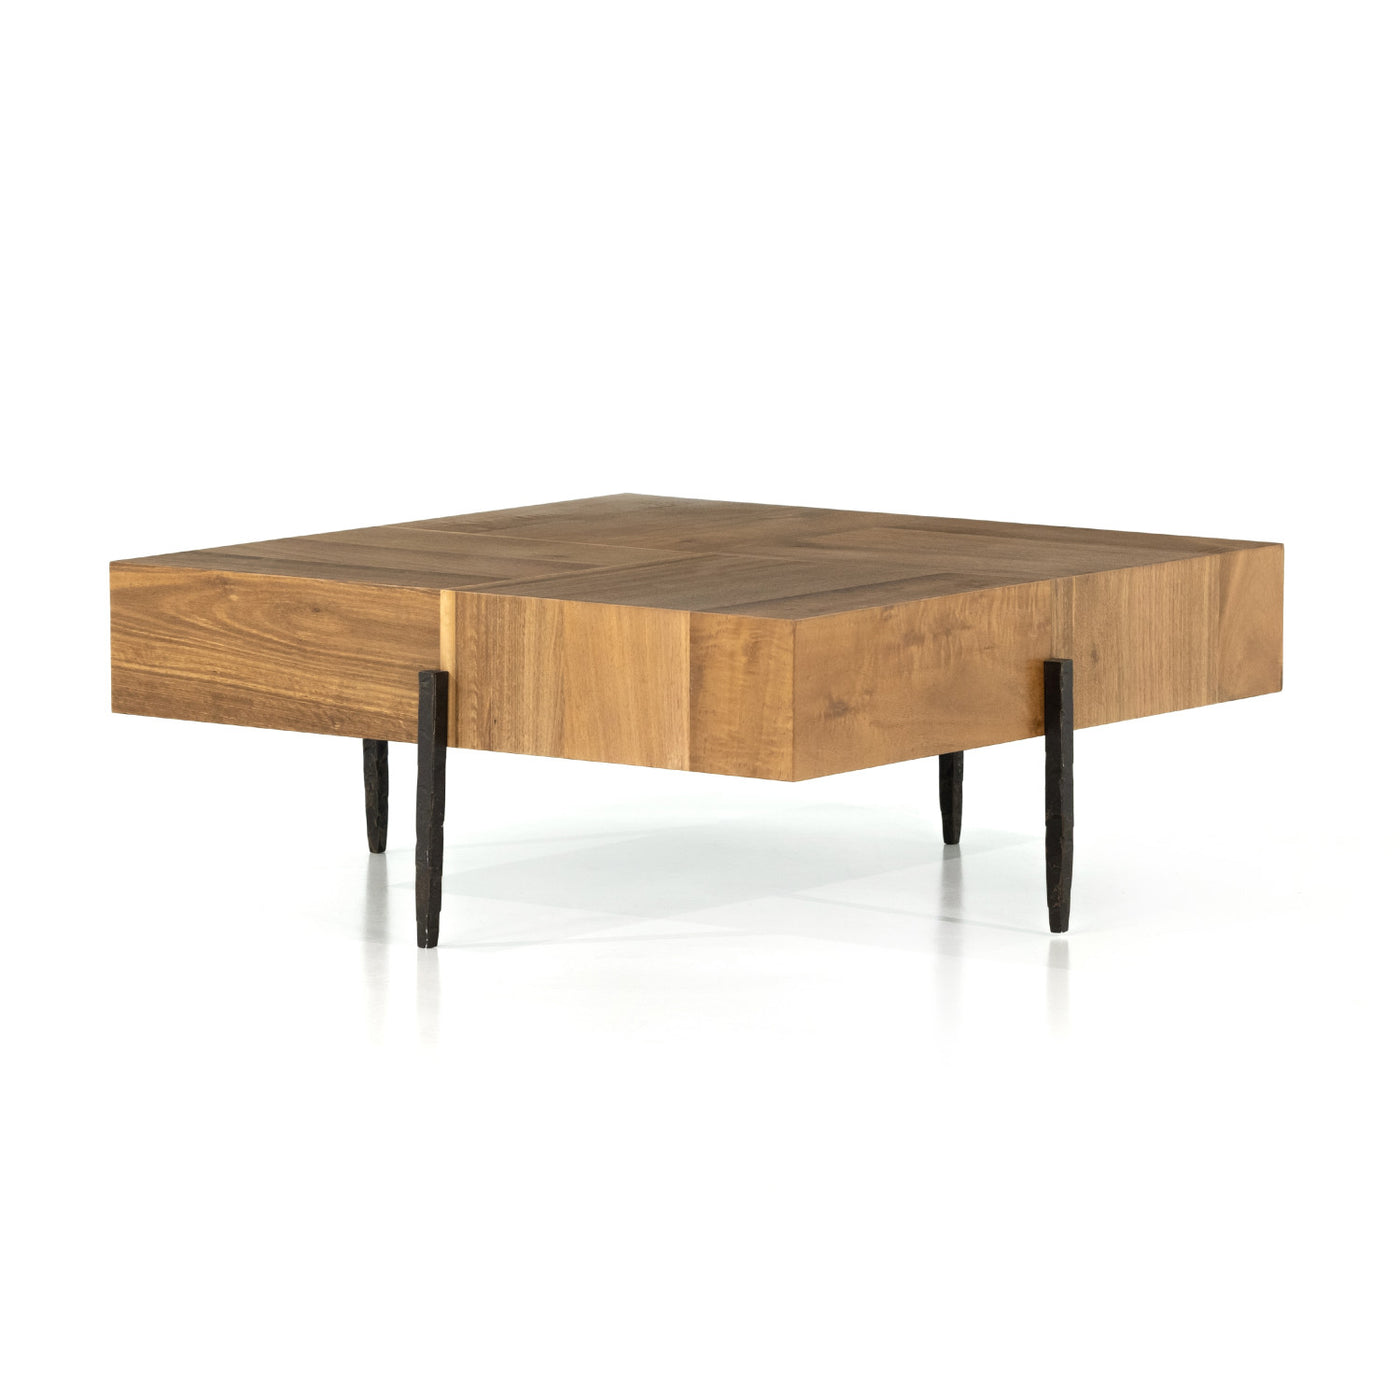 INDRA SQUARE COFFEE TABLE,NATURAL YUKAS